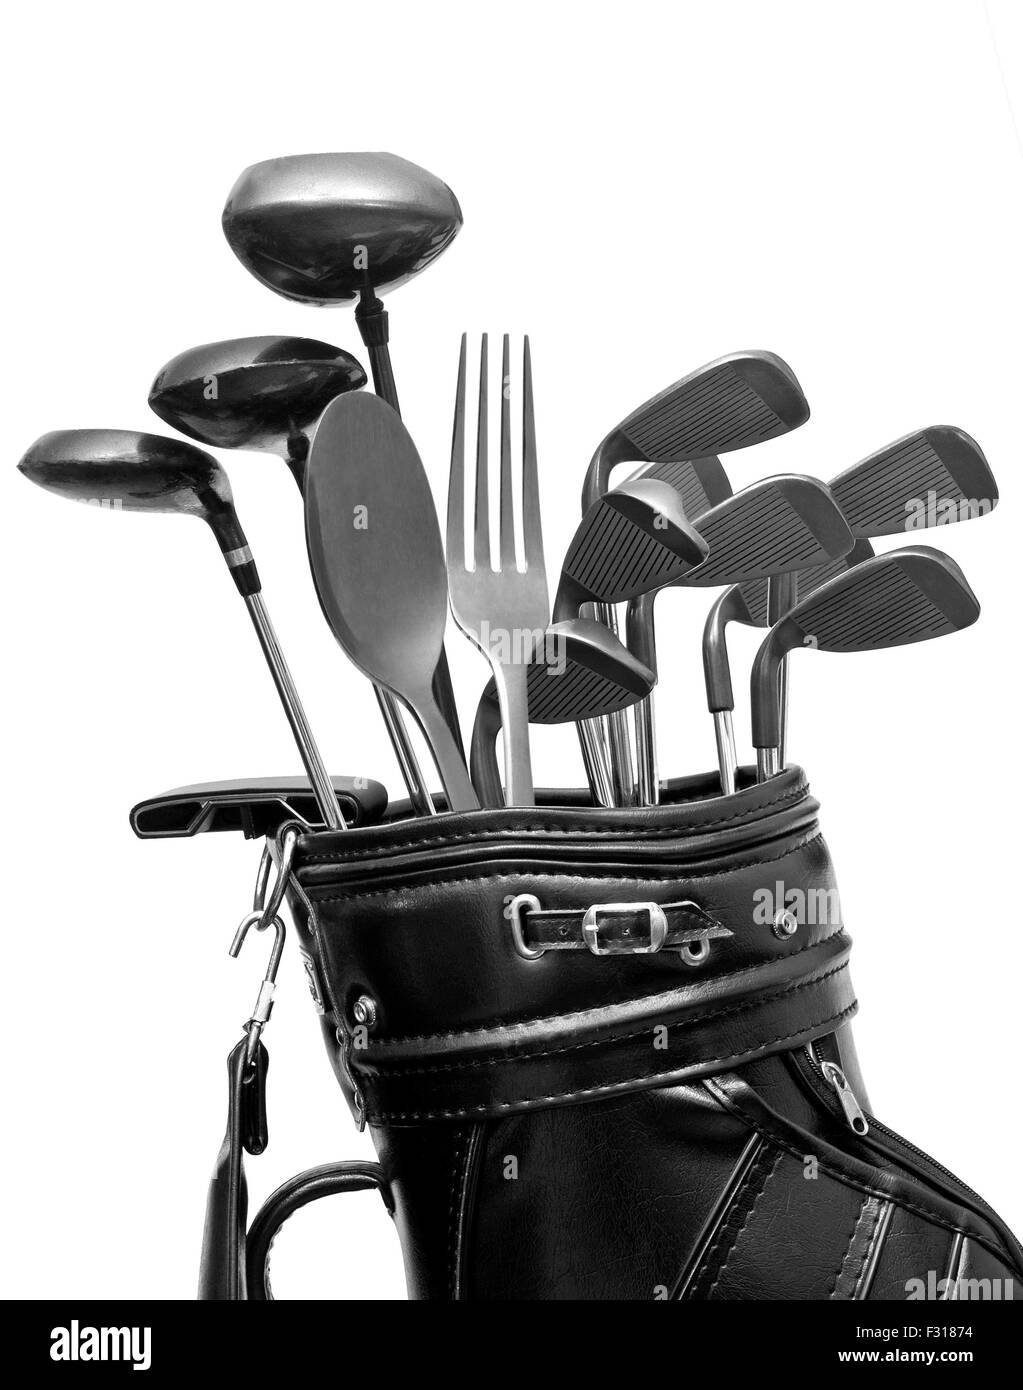 Gourmet golf package Stock Photo